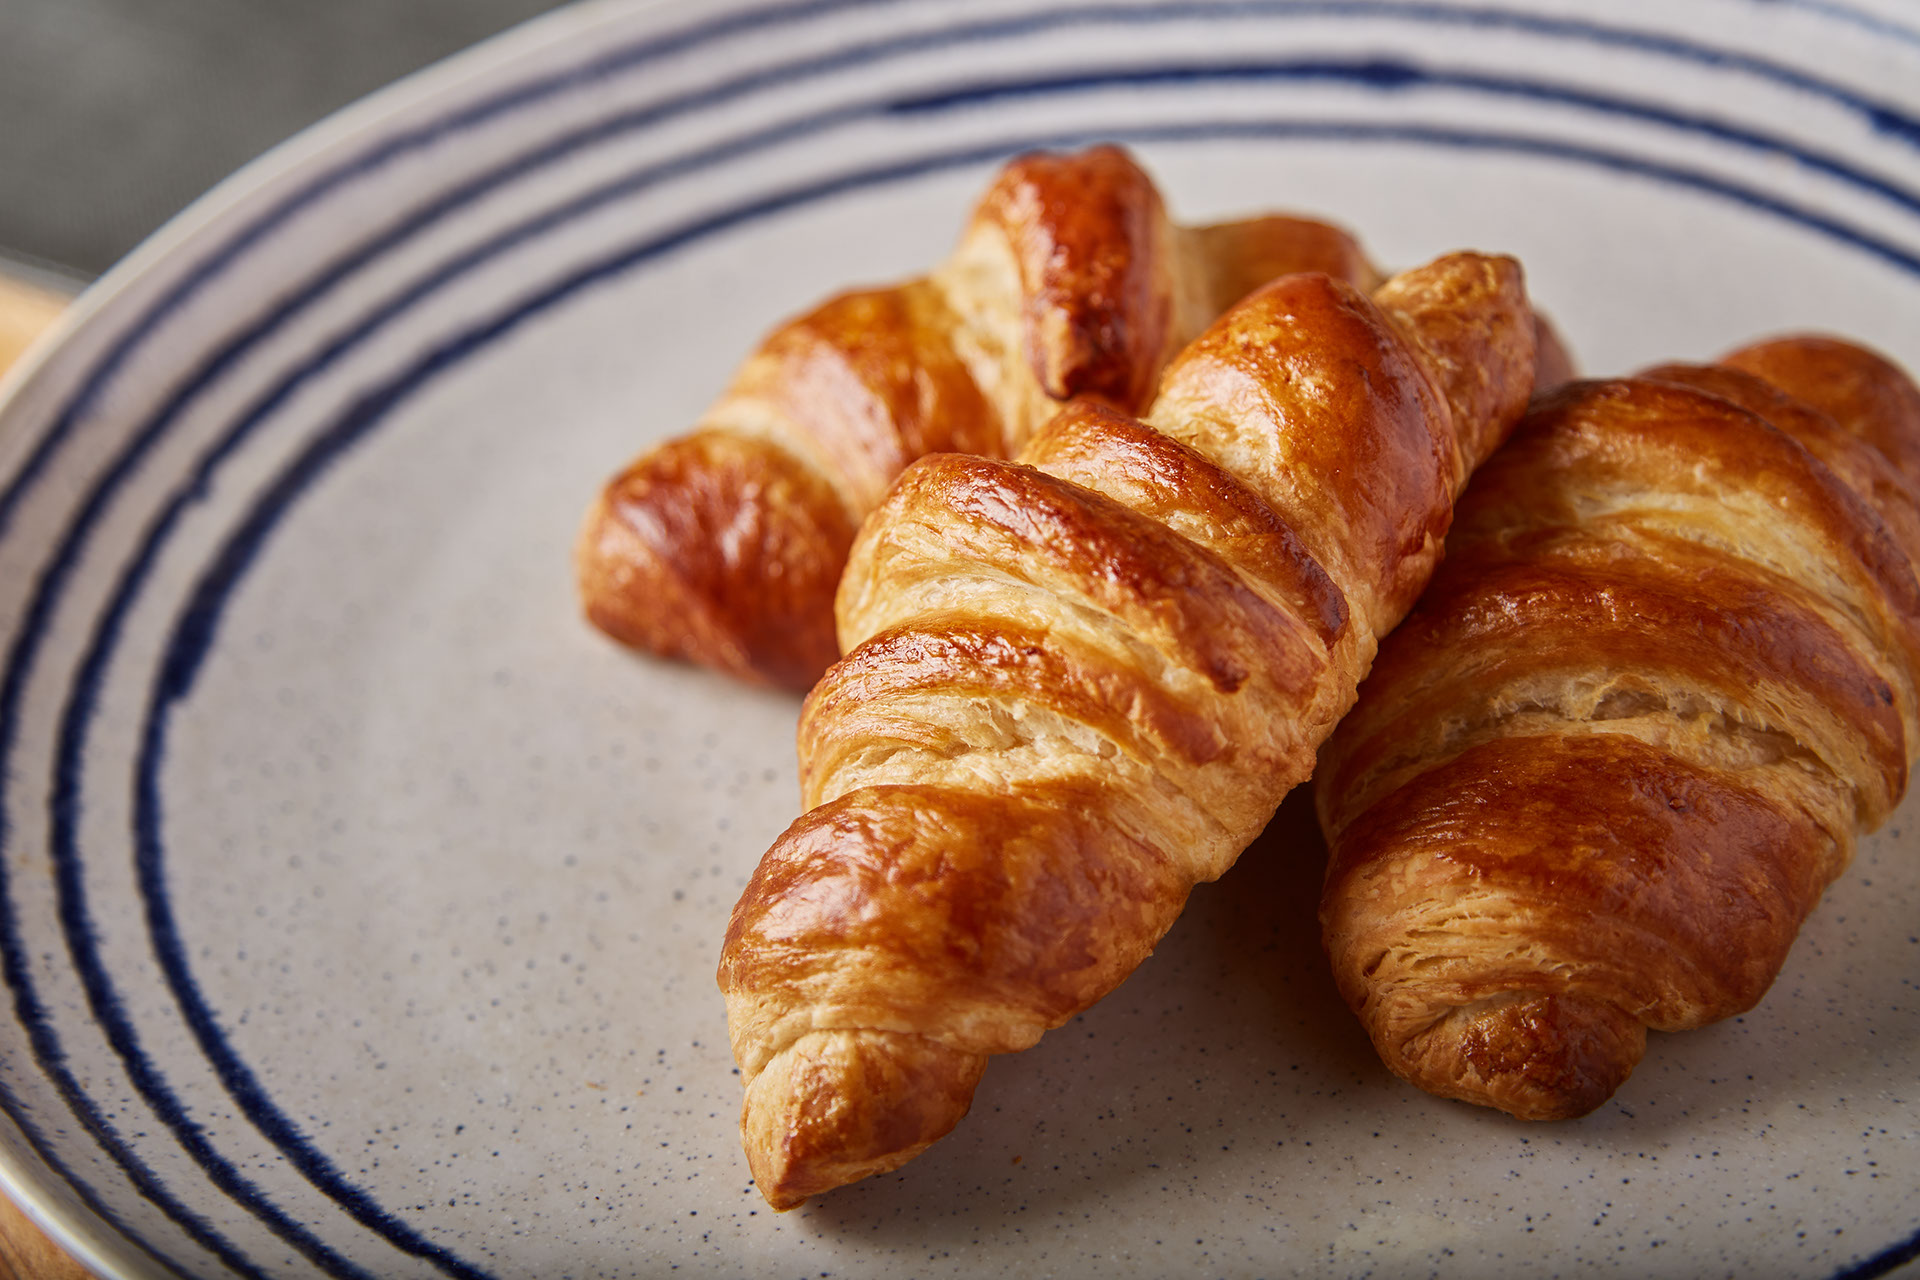 plan croissant on white plate